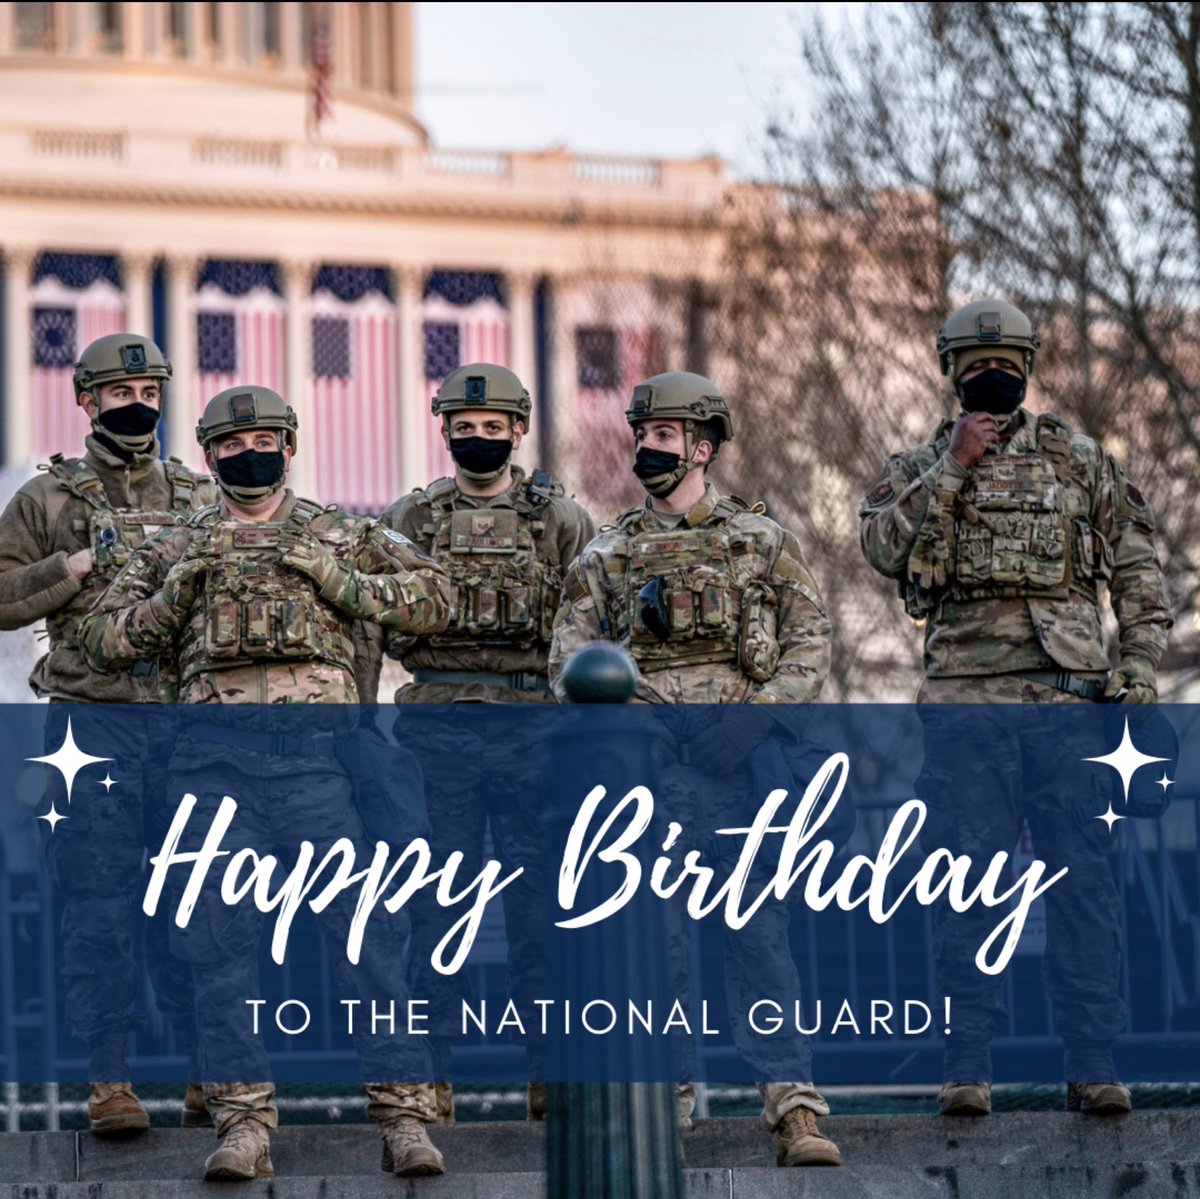 “Always Ready, Always There” we appreciate the service of our National Guard and wish them a happy birthday! 

#nationalguard #militarylife #military #veterans #veteranshelpingveterans #veterans4veterans #thankyouforyourservice #militarynonprofit #happybirthday #nationalguardlife